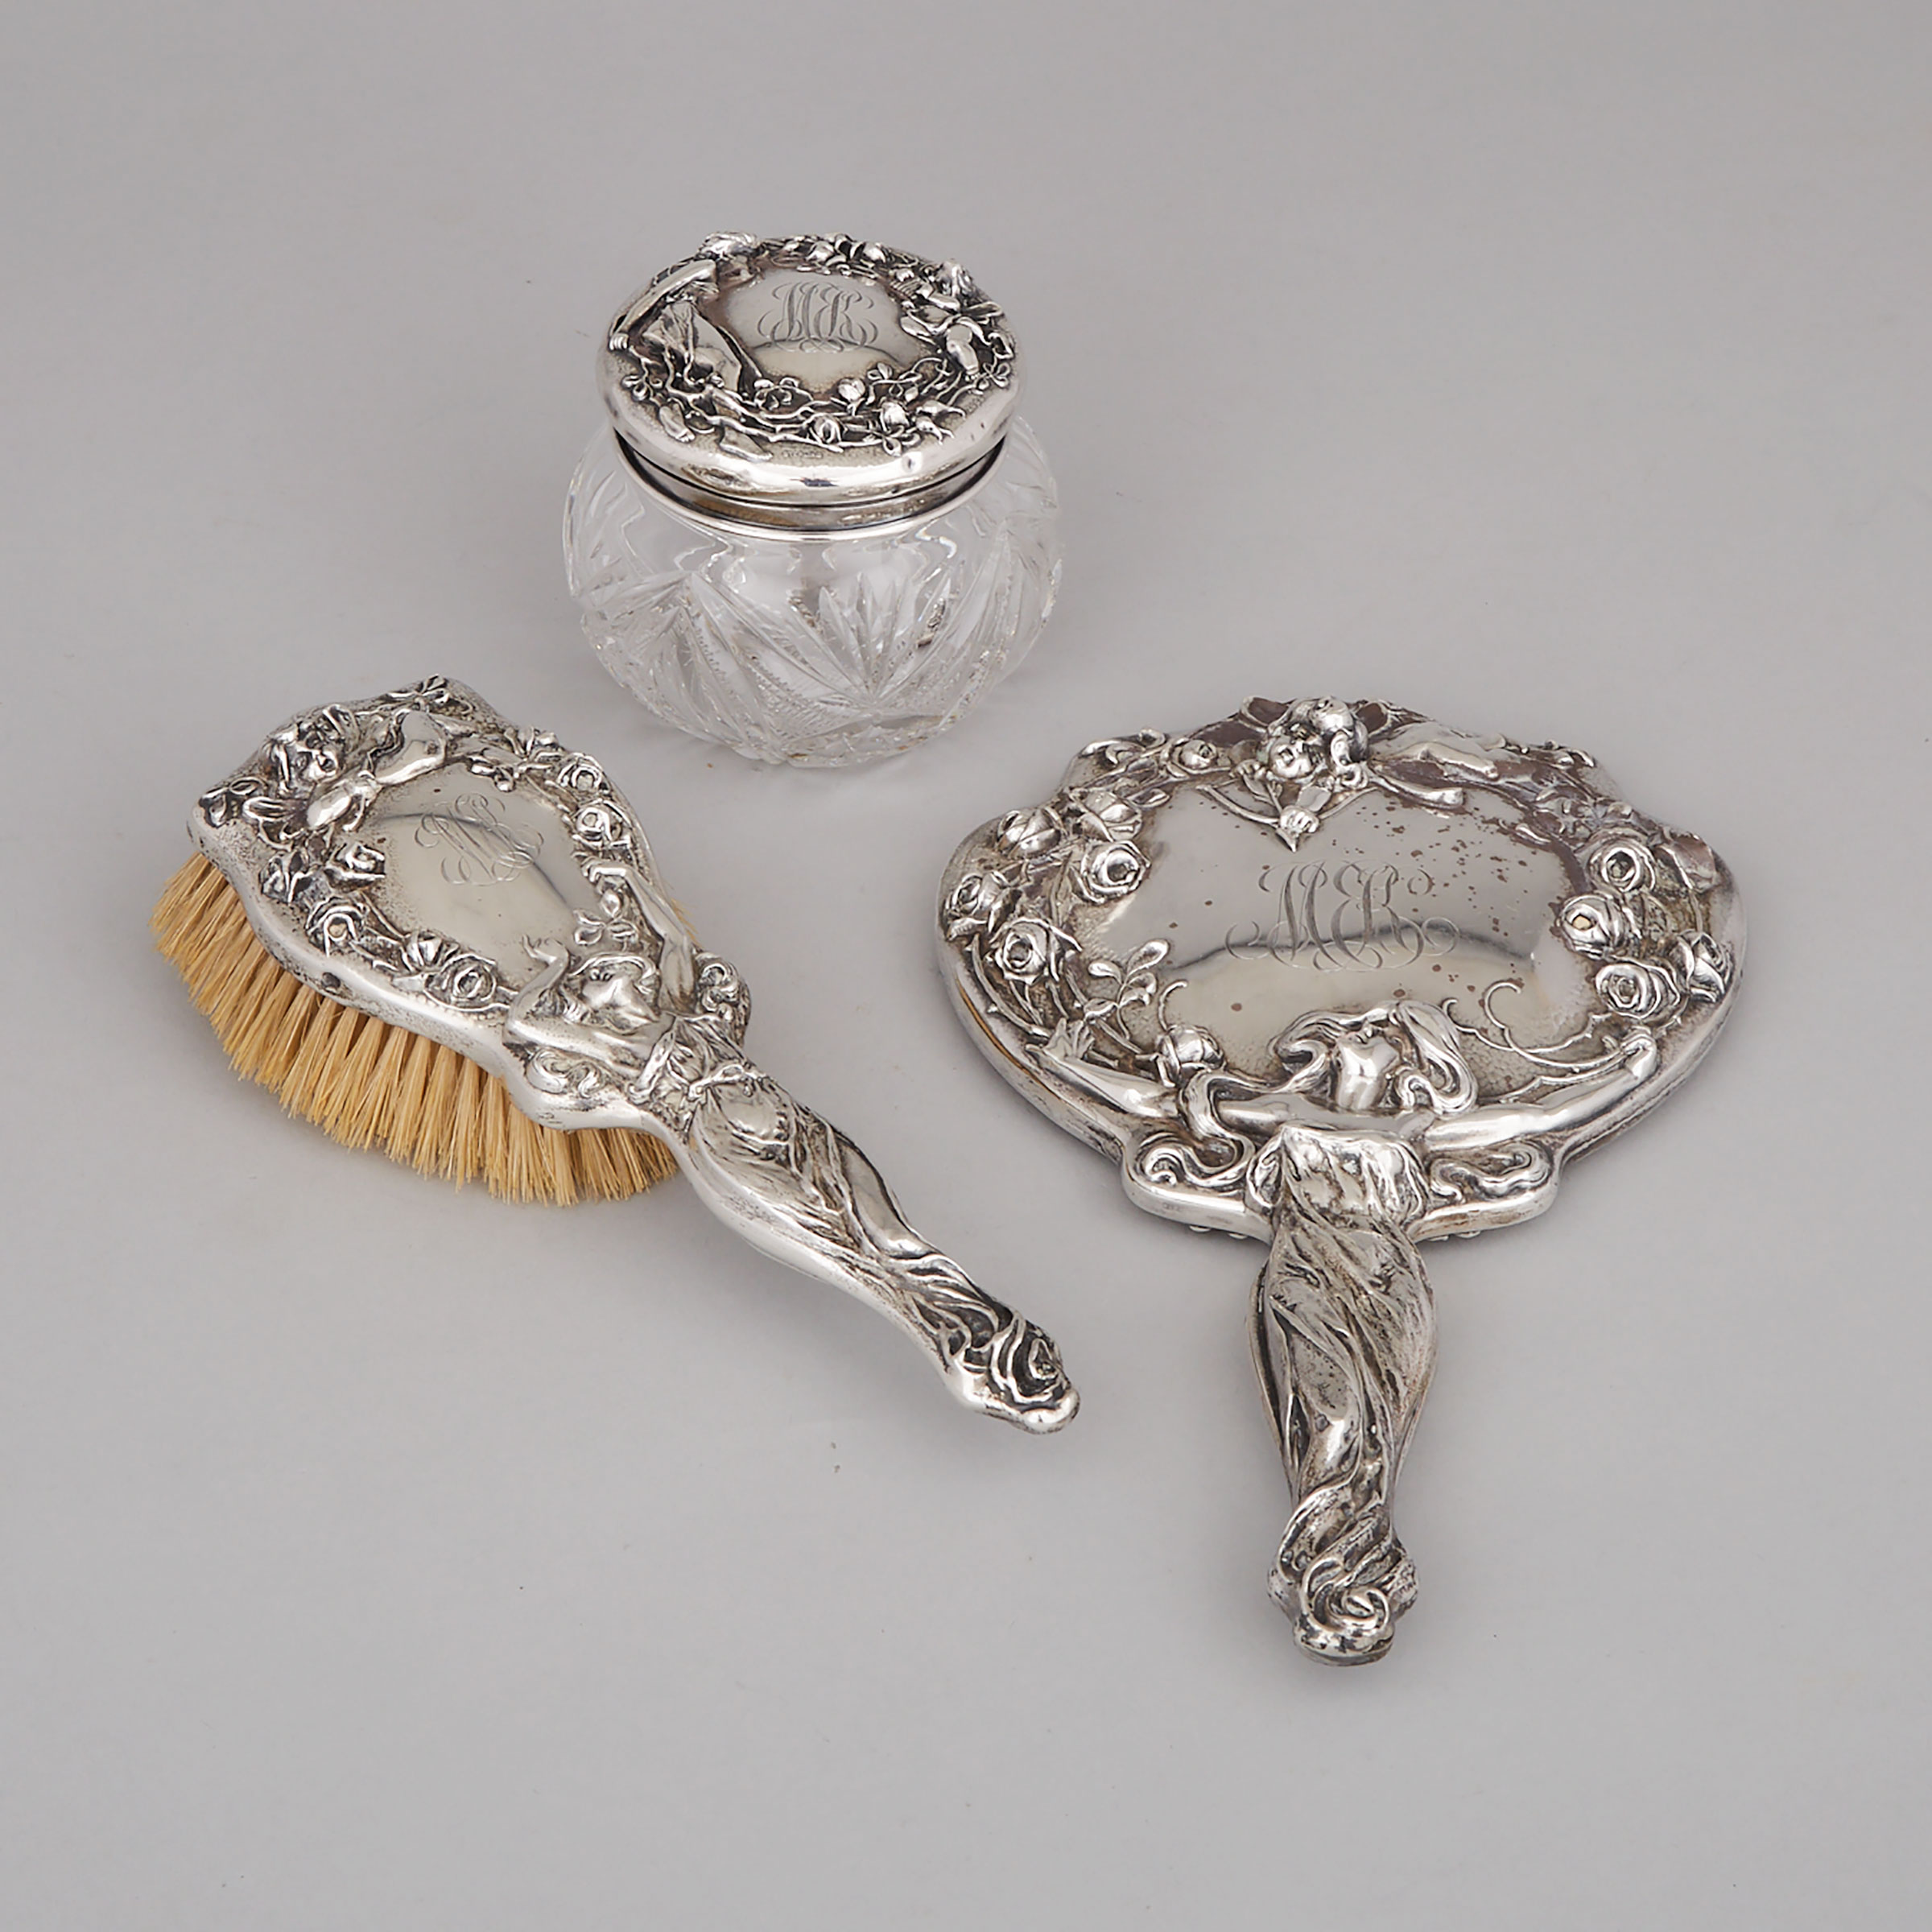 American Art Nouveau Silver Dressing Table Set, early 20th century